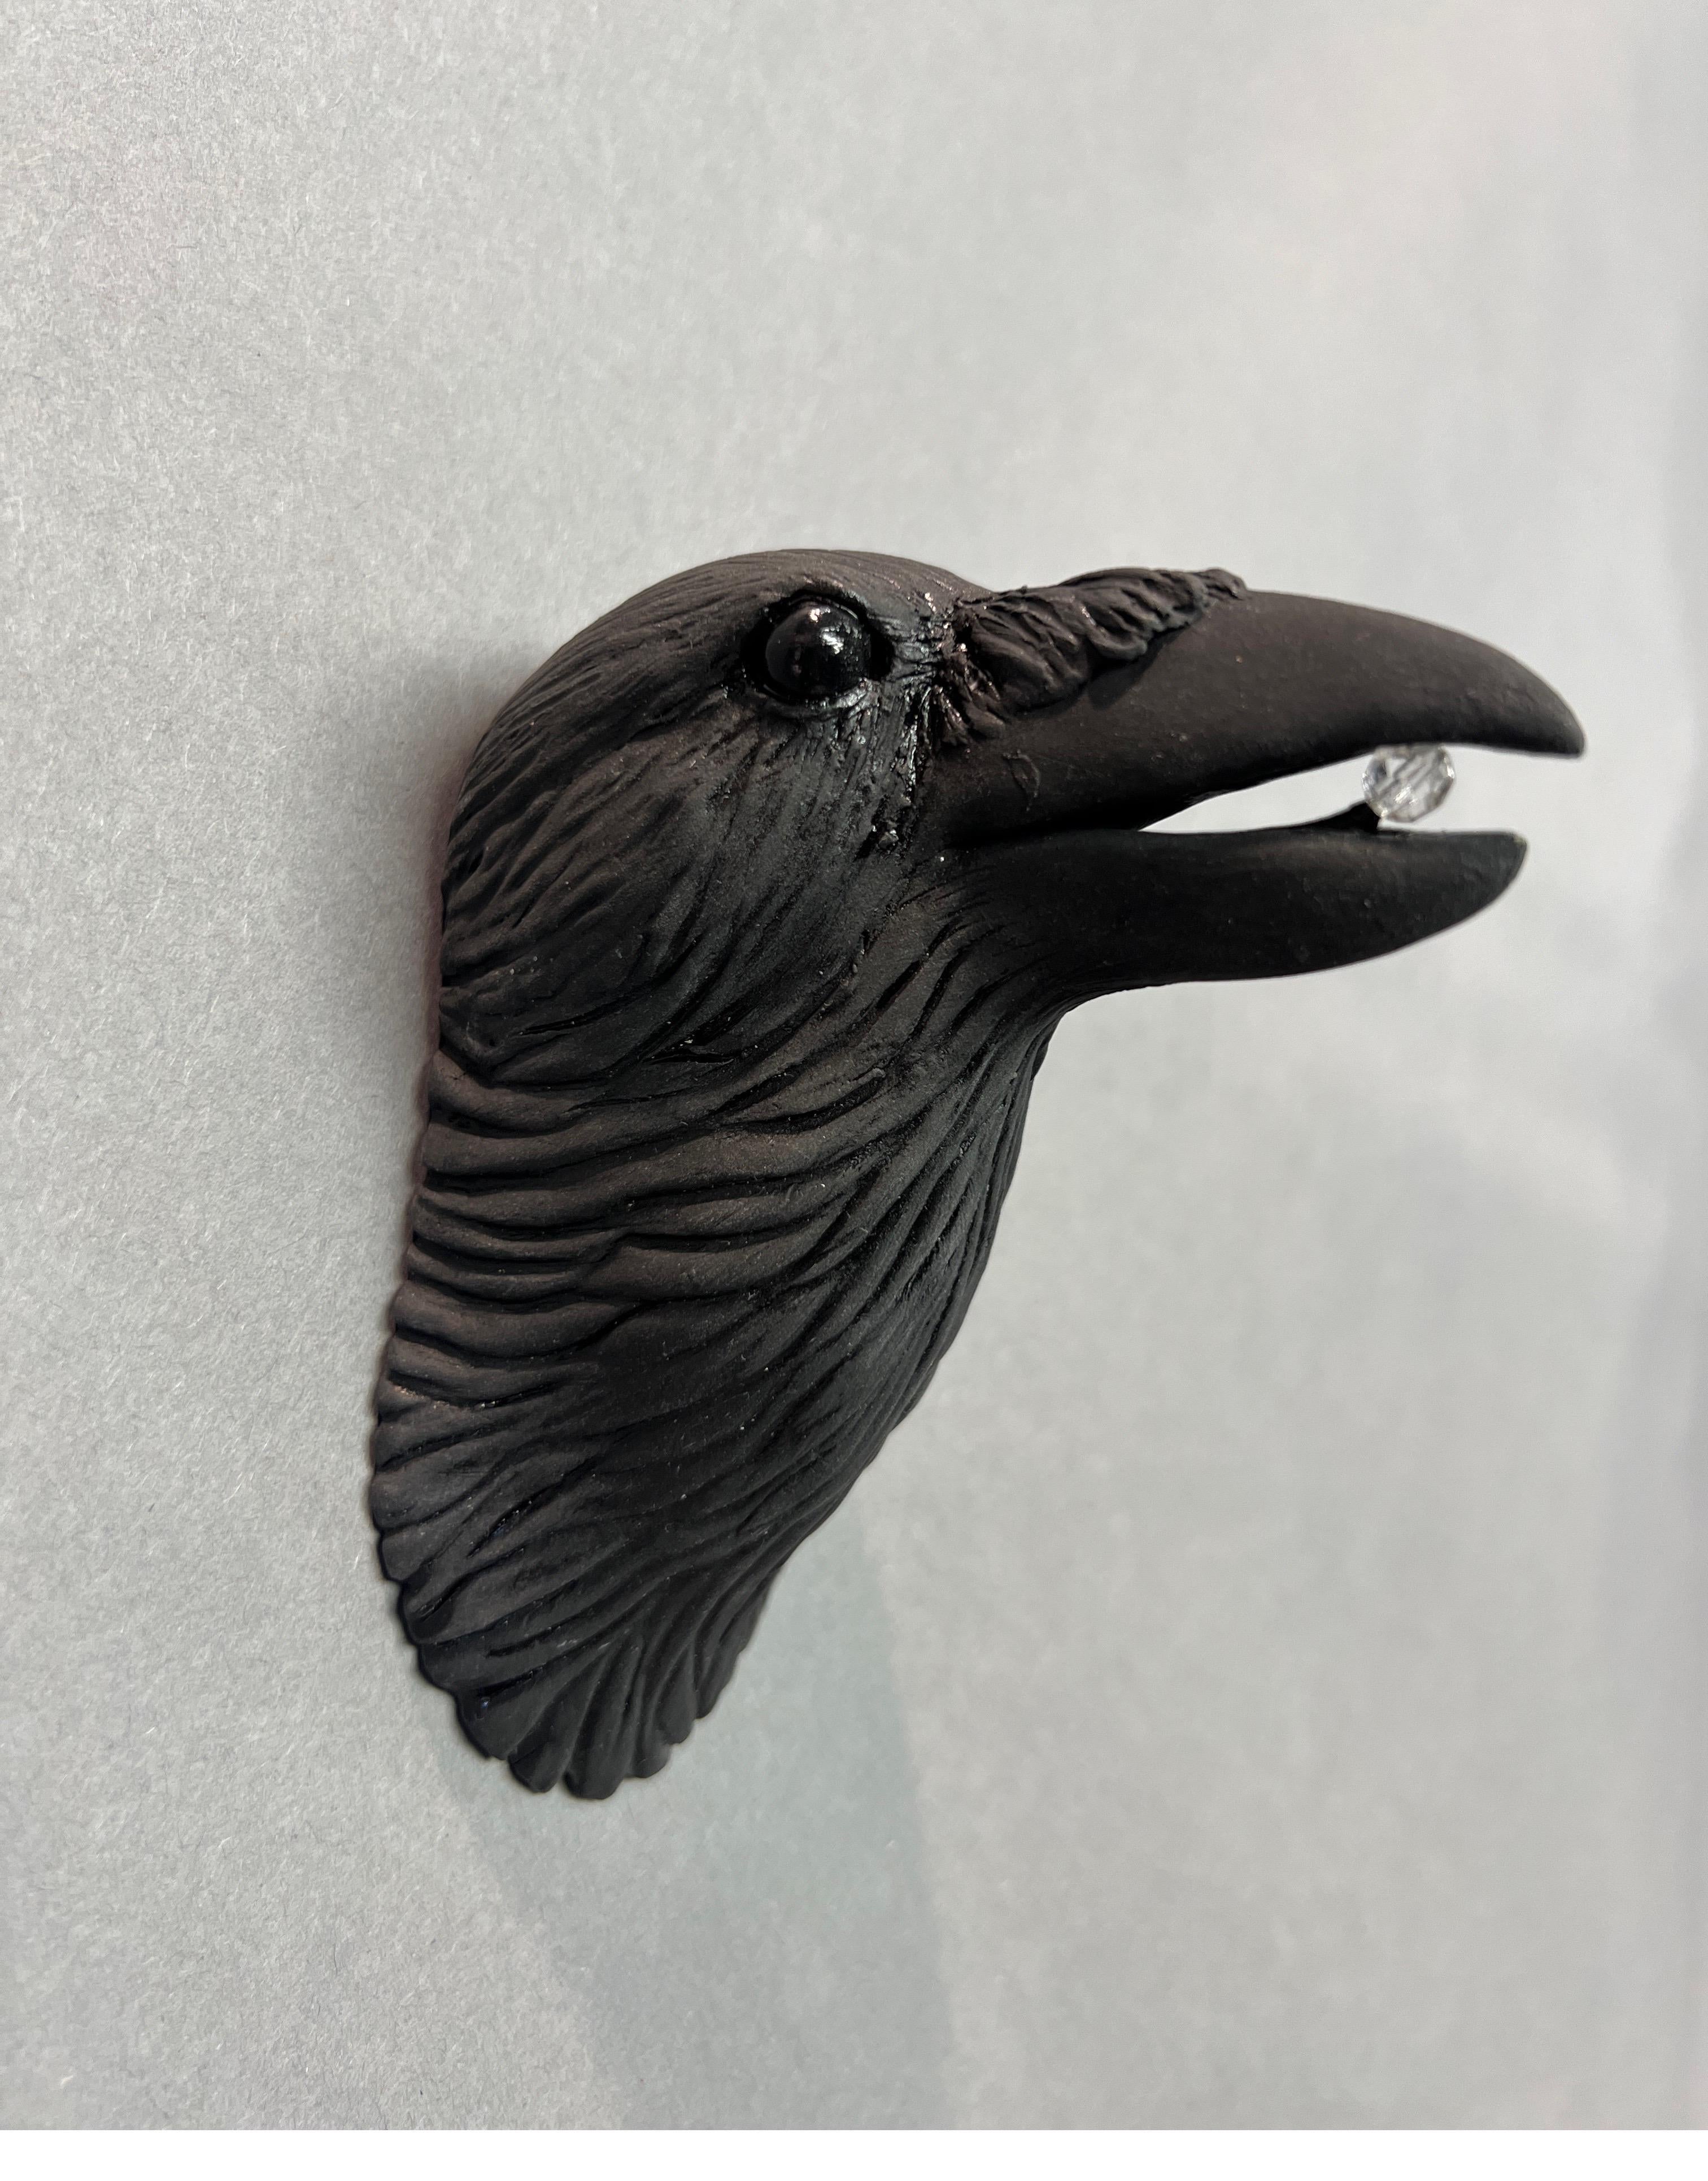 Ceramic Wall Sculpture of Crow #9 with Crystal in Beak 6